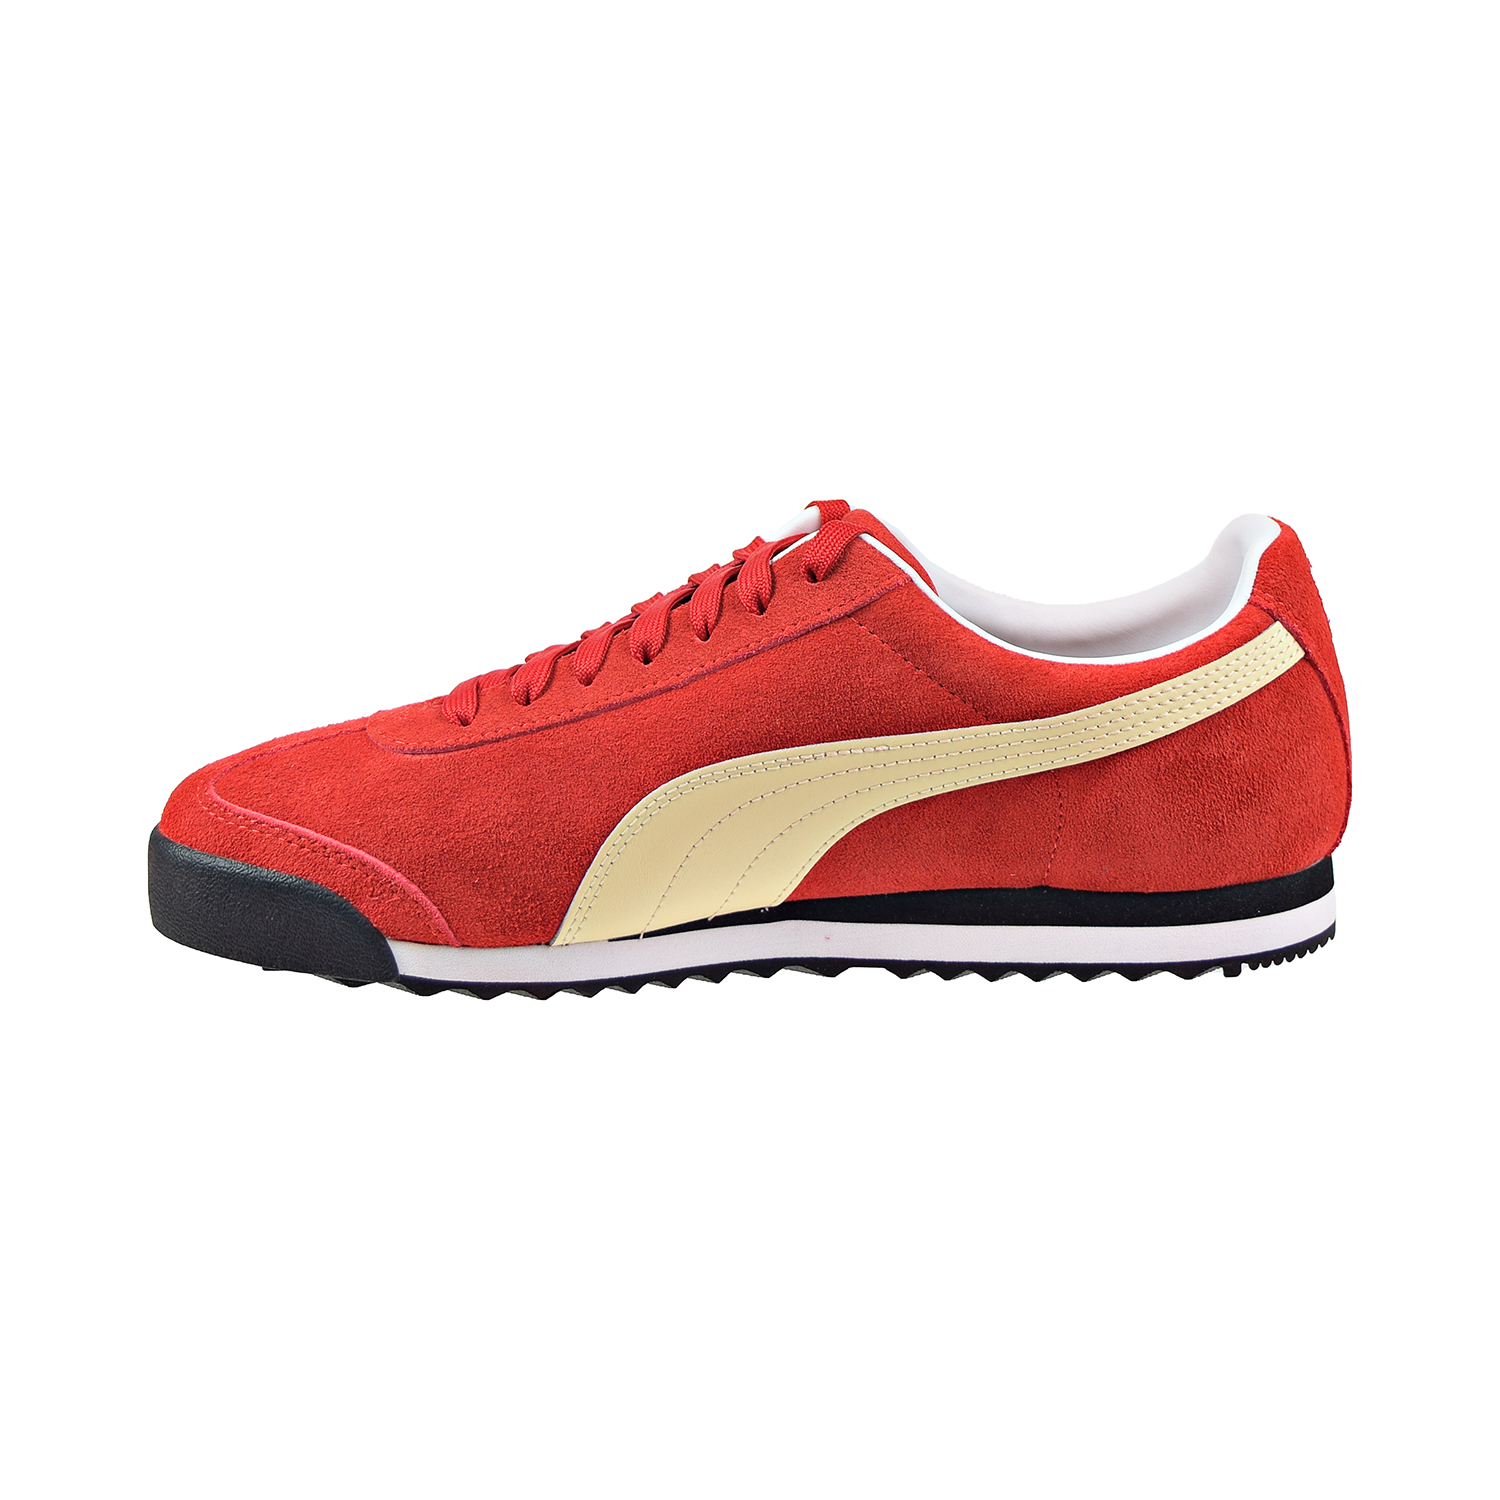 Puma Roma Suede Men's Shoes High Risk Red/Summer Melon 365437-13 - image 4 of 6